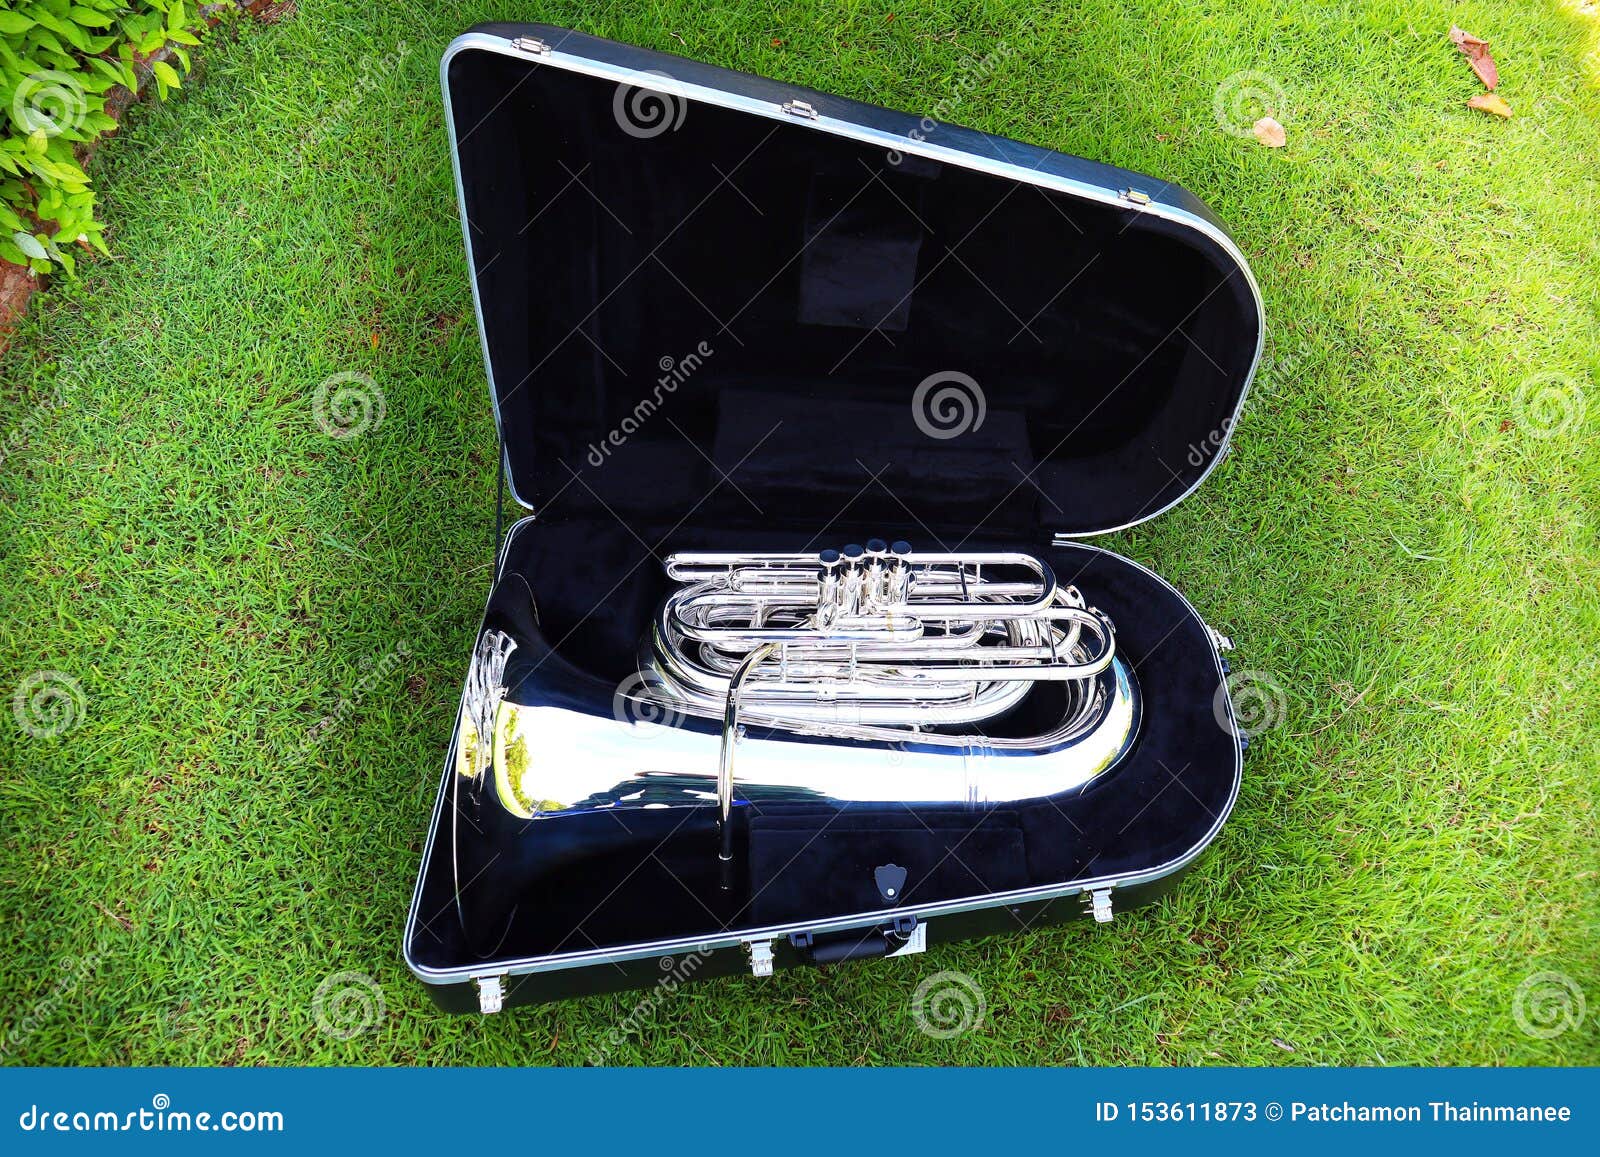 Tuba is a Sax Horn Tuba Musical Instrument with a Large Wind Pipe Marching  Band Stock Image - Image of band, large: 153611873